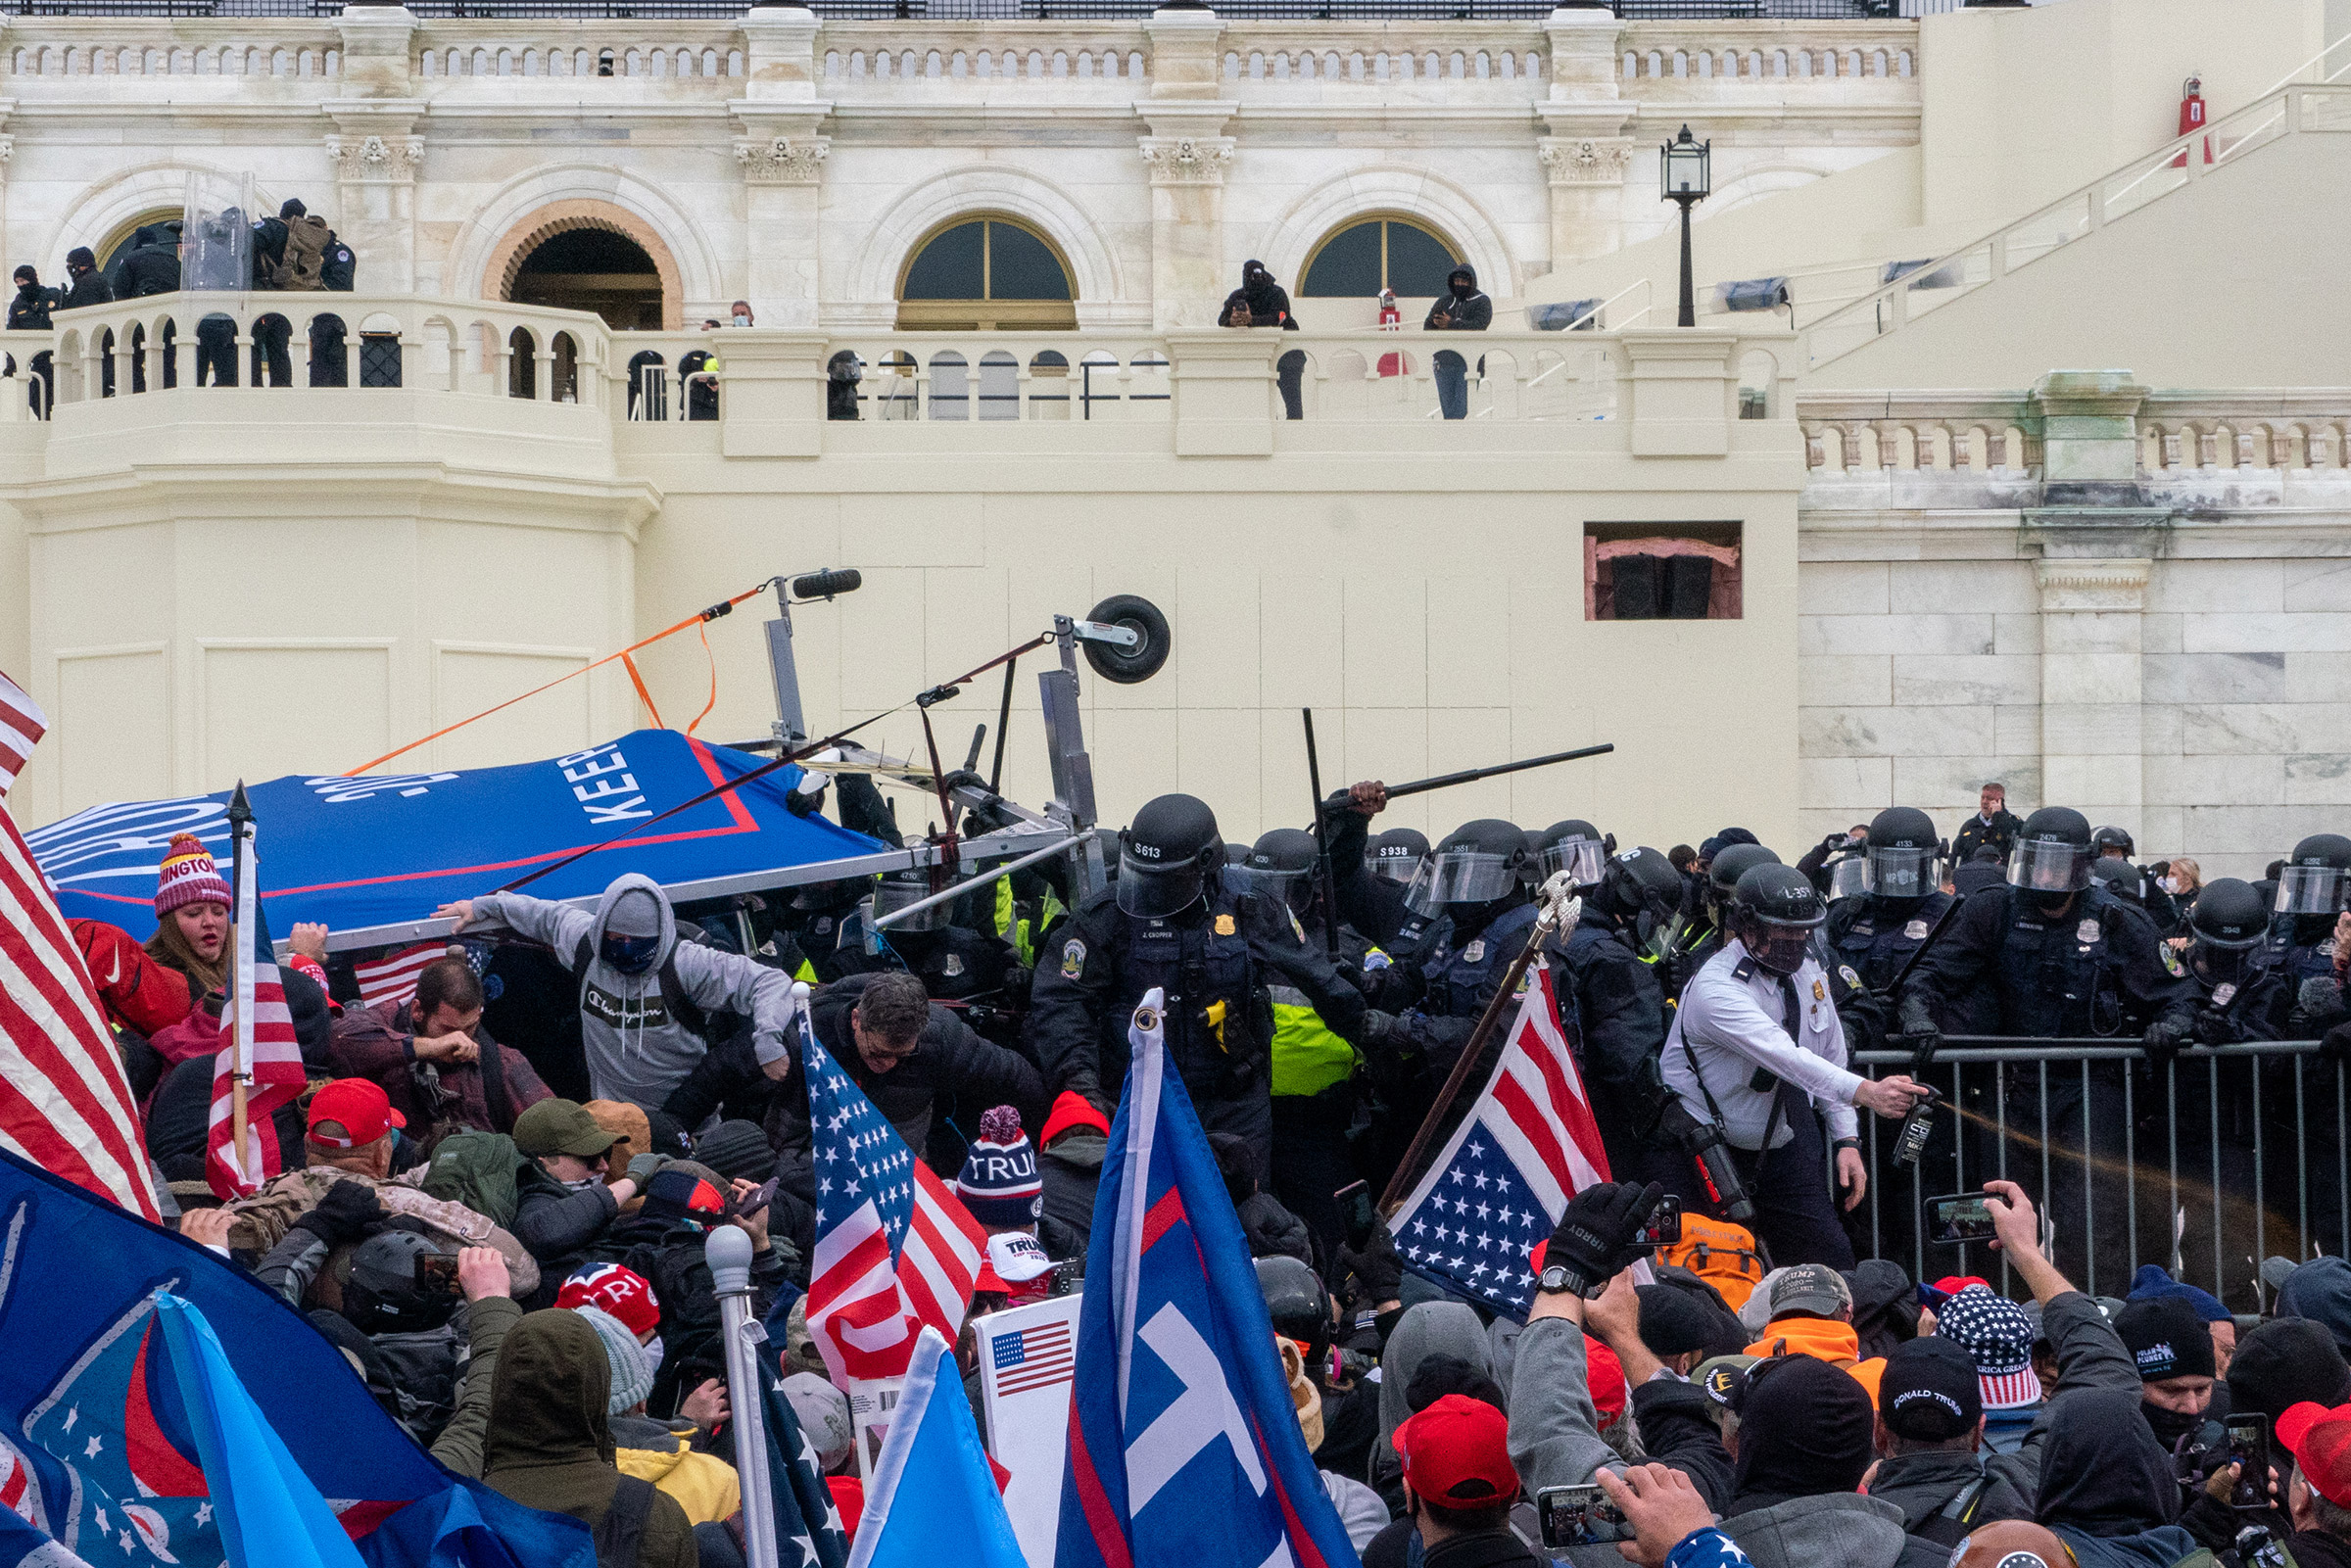 Pro-Trump rioters clash with police before gaining entry to the U.S. Capitol following an inflammatory speech by President Trump on Jan. 6. (Peter van Agtmael—Magnum Photos for TIME)